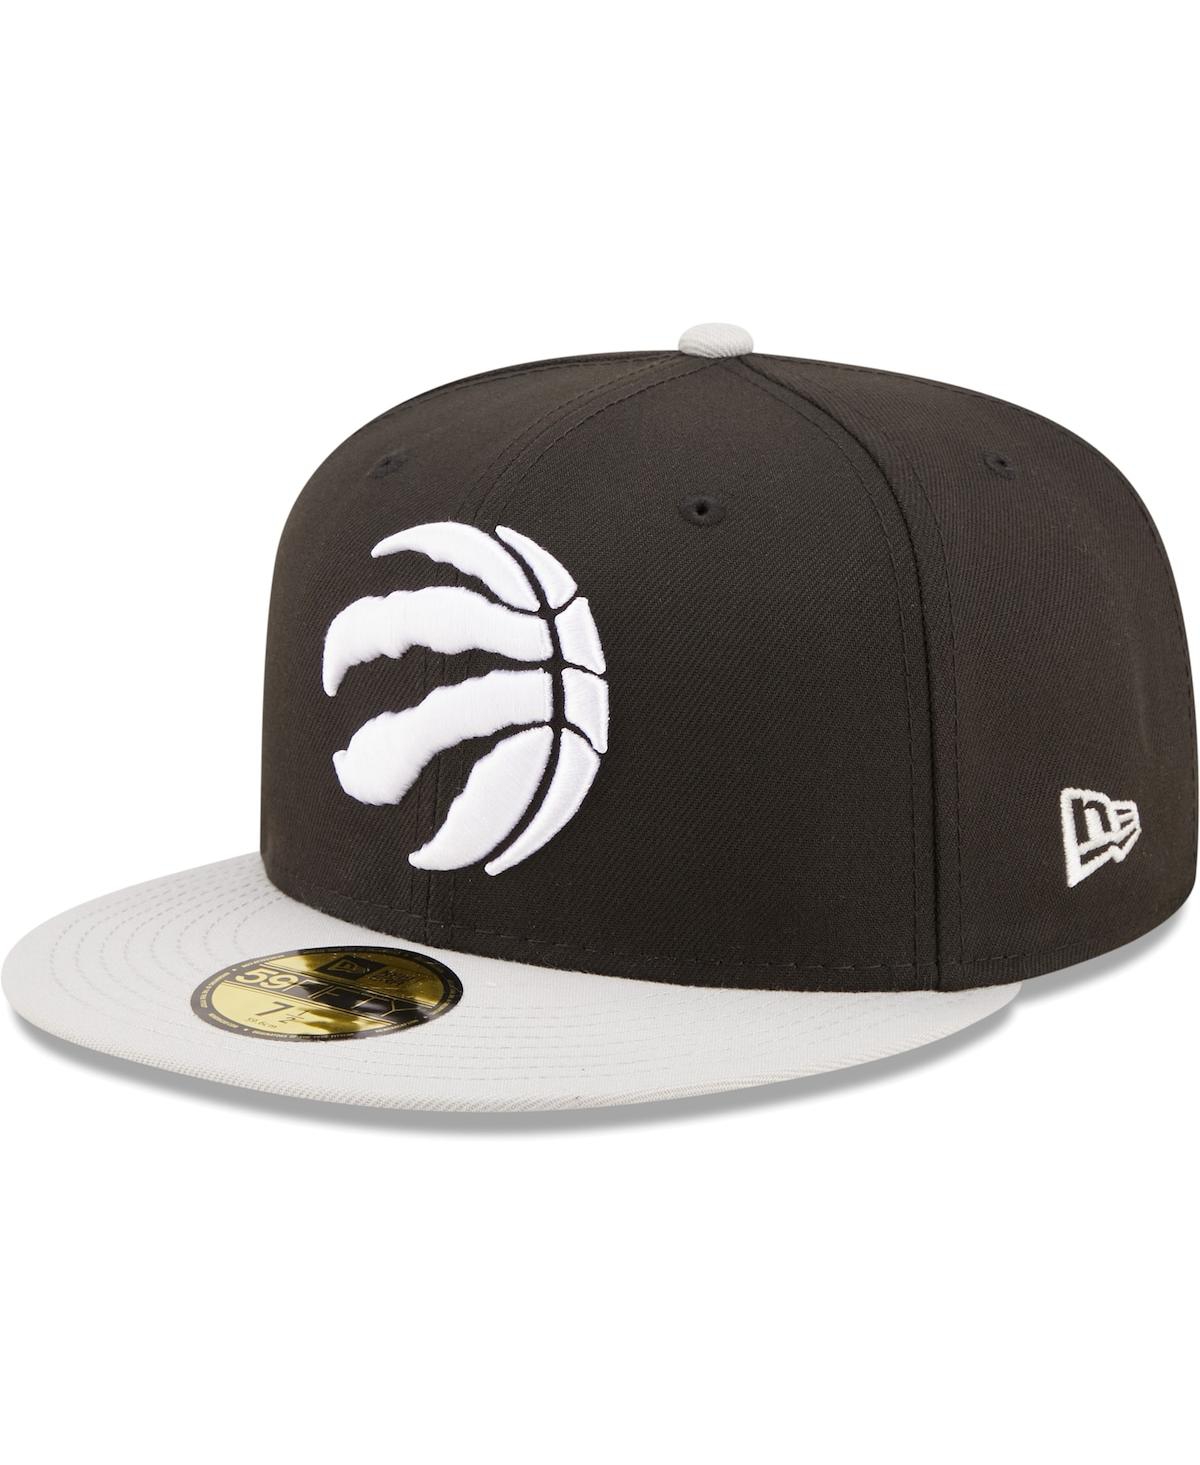 NEW ERA MEN'S NEW ERA BLACK, GRAY TORONTO RAPTORS TWO-TONE COLOR PACK 59FIFTY FITTED HAT